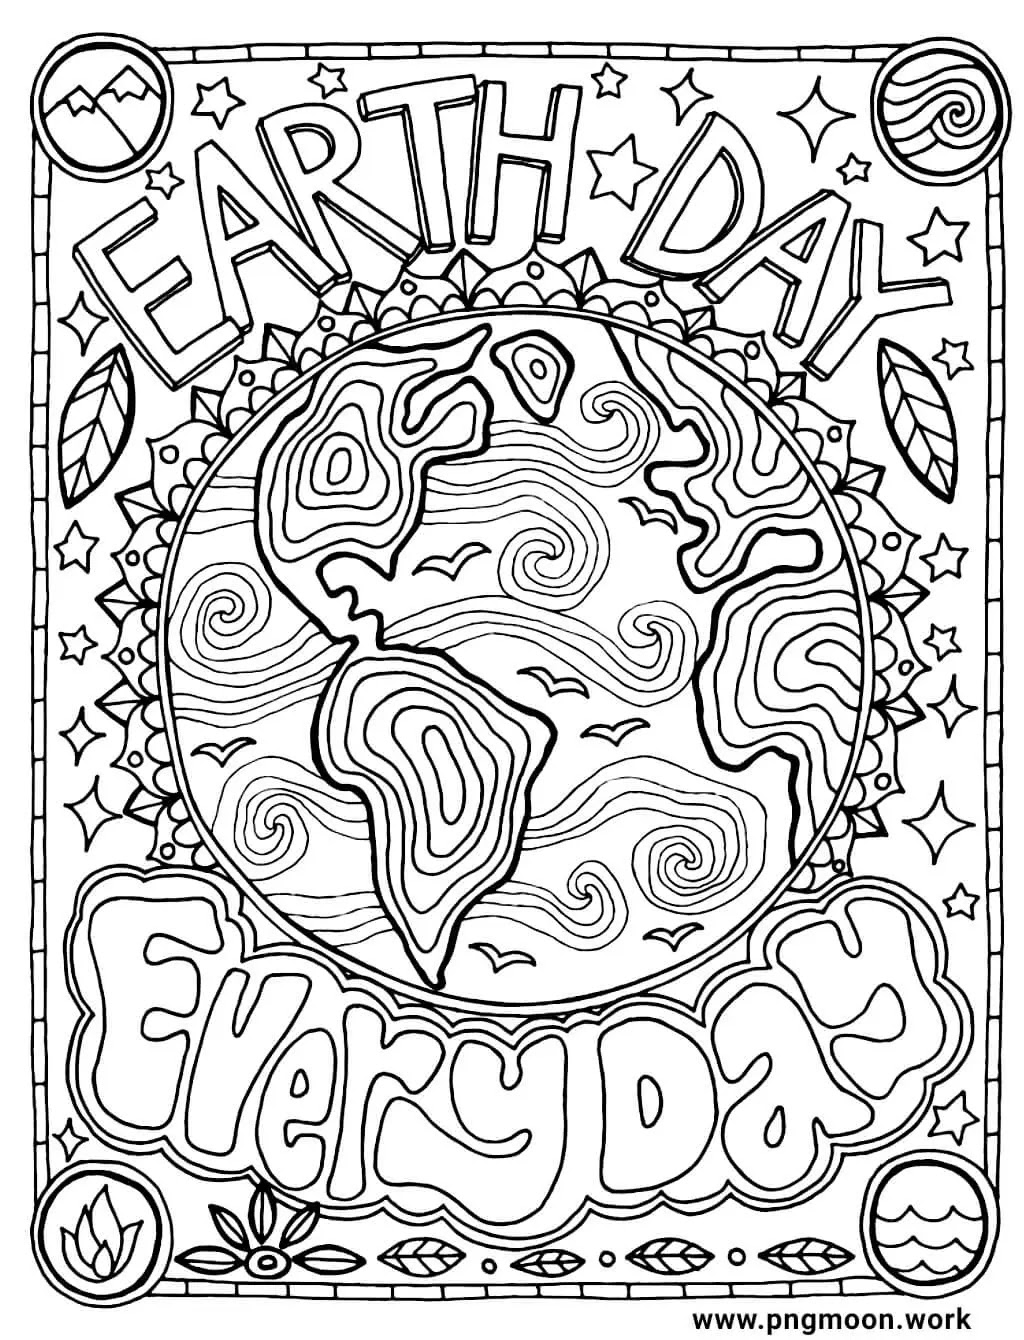 earth day coloring sheet